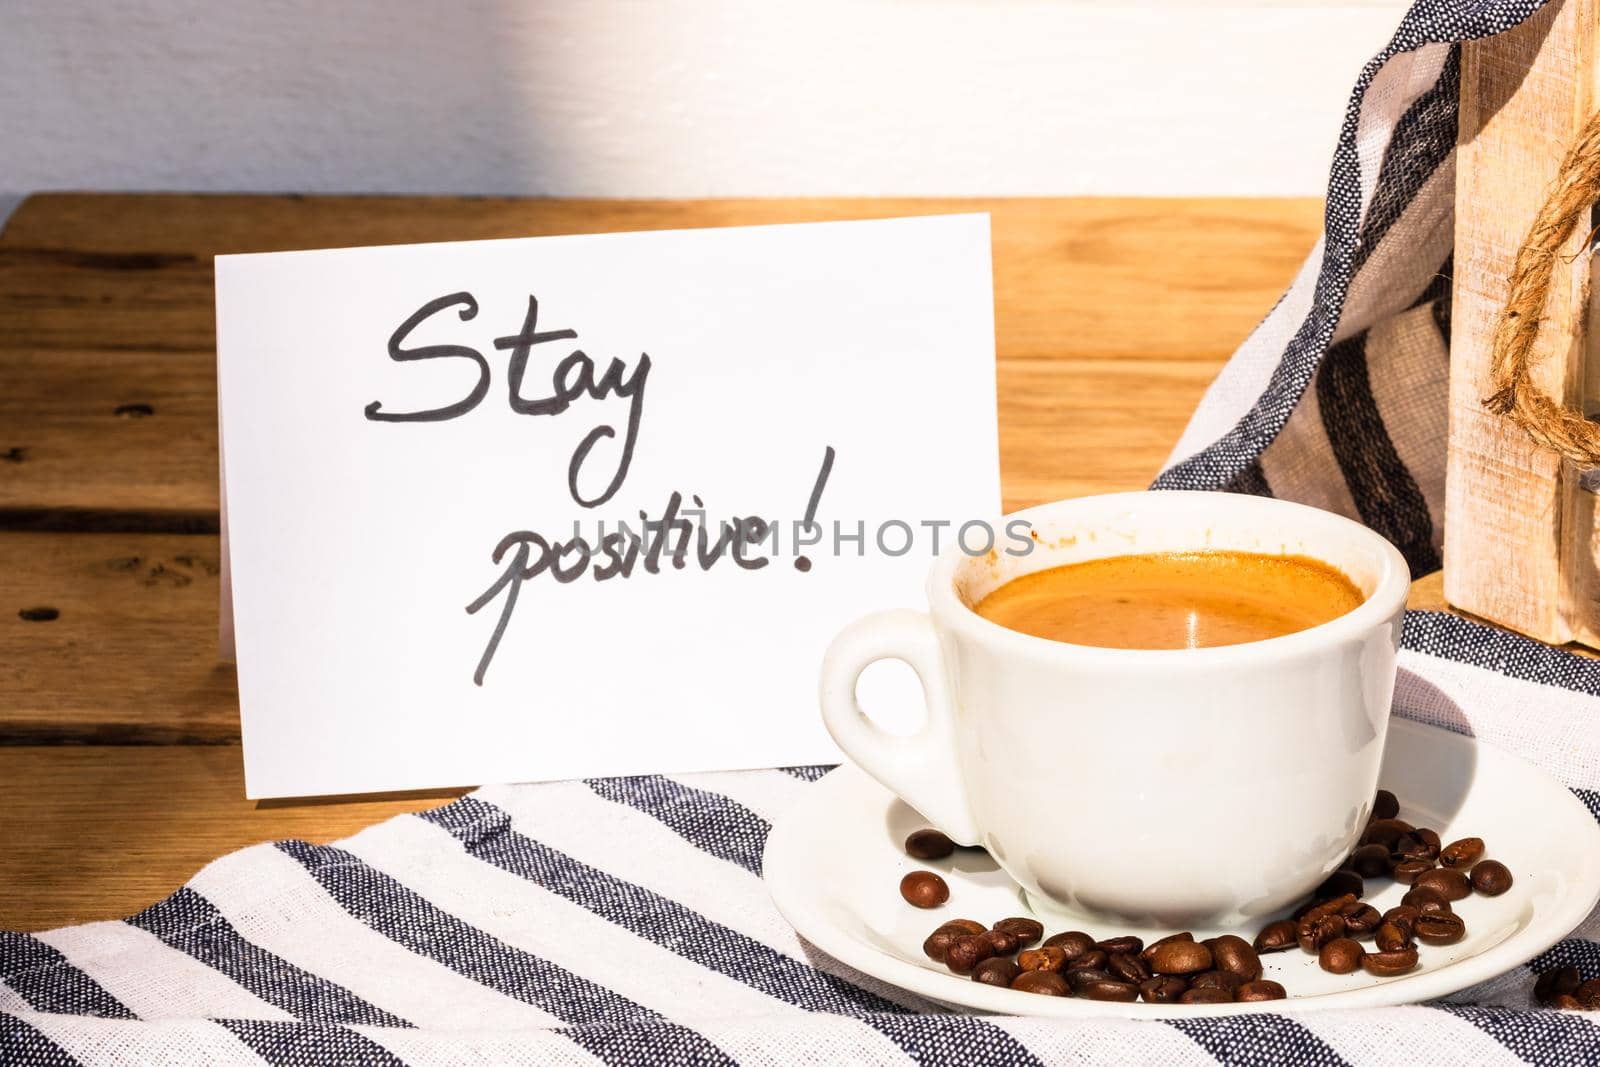 Coffee cup and buttered fresh French croissant on wooden crate. Food and breakfast concept. Morning message “stay positive” on white board